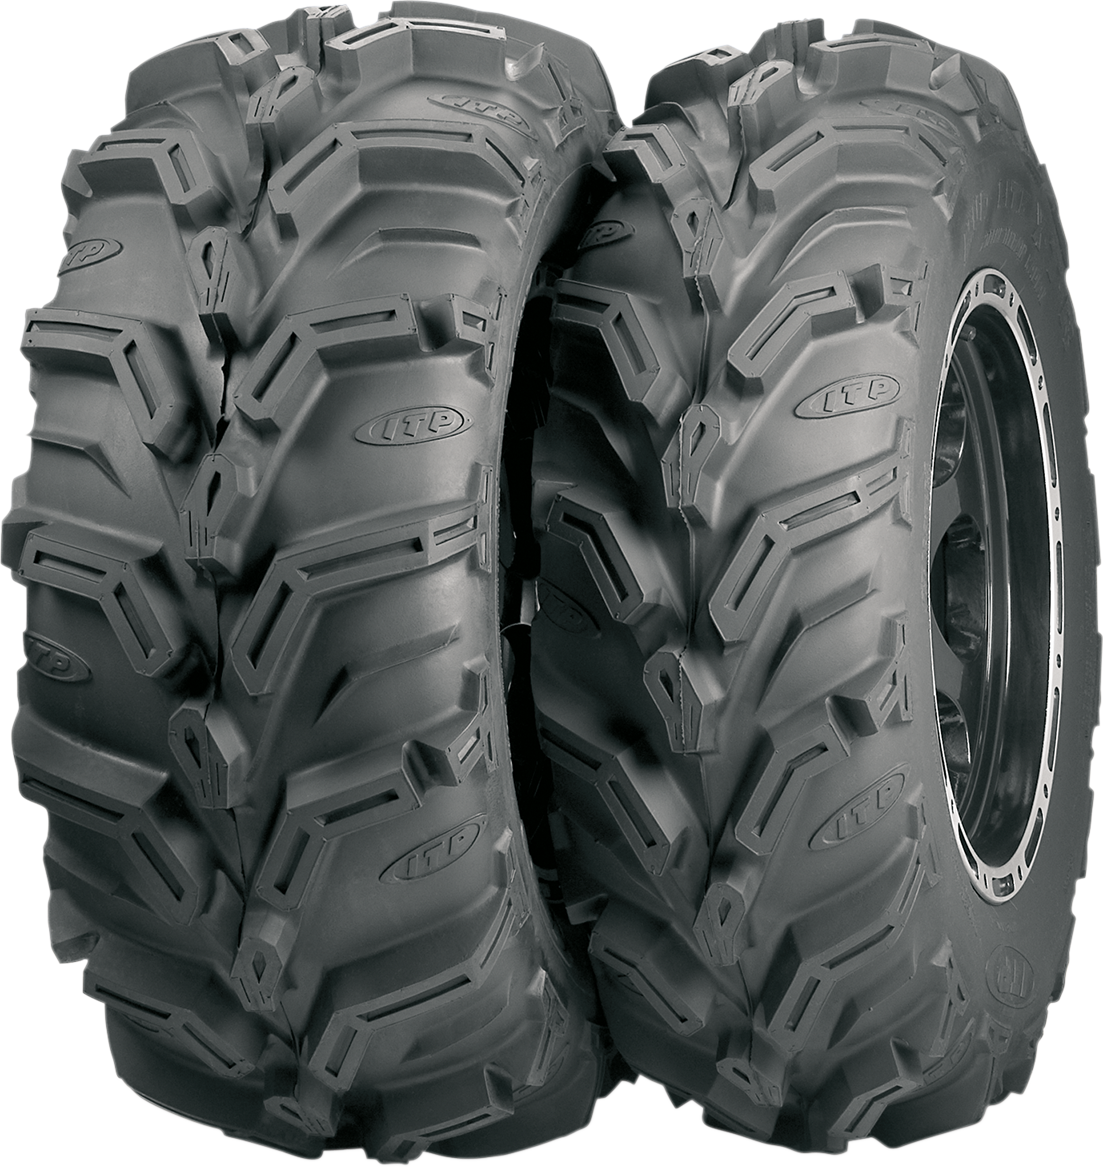 ITP Tire - Mud Lite XTR - Front/Rear - 25x8R12 - 6 Ply 560398